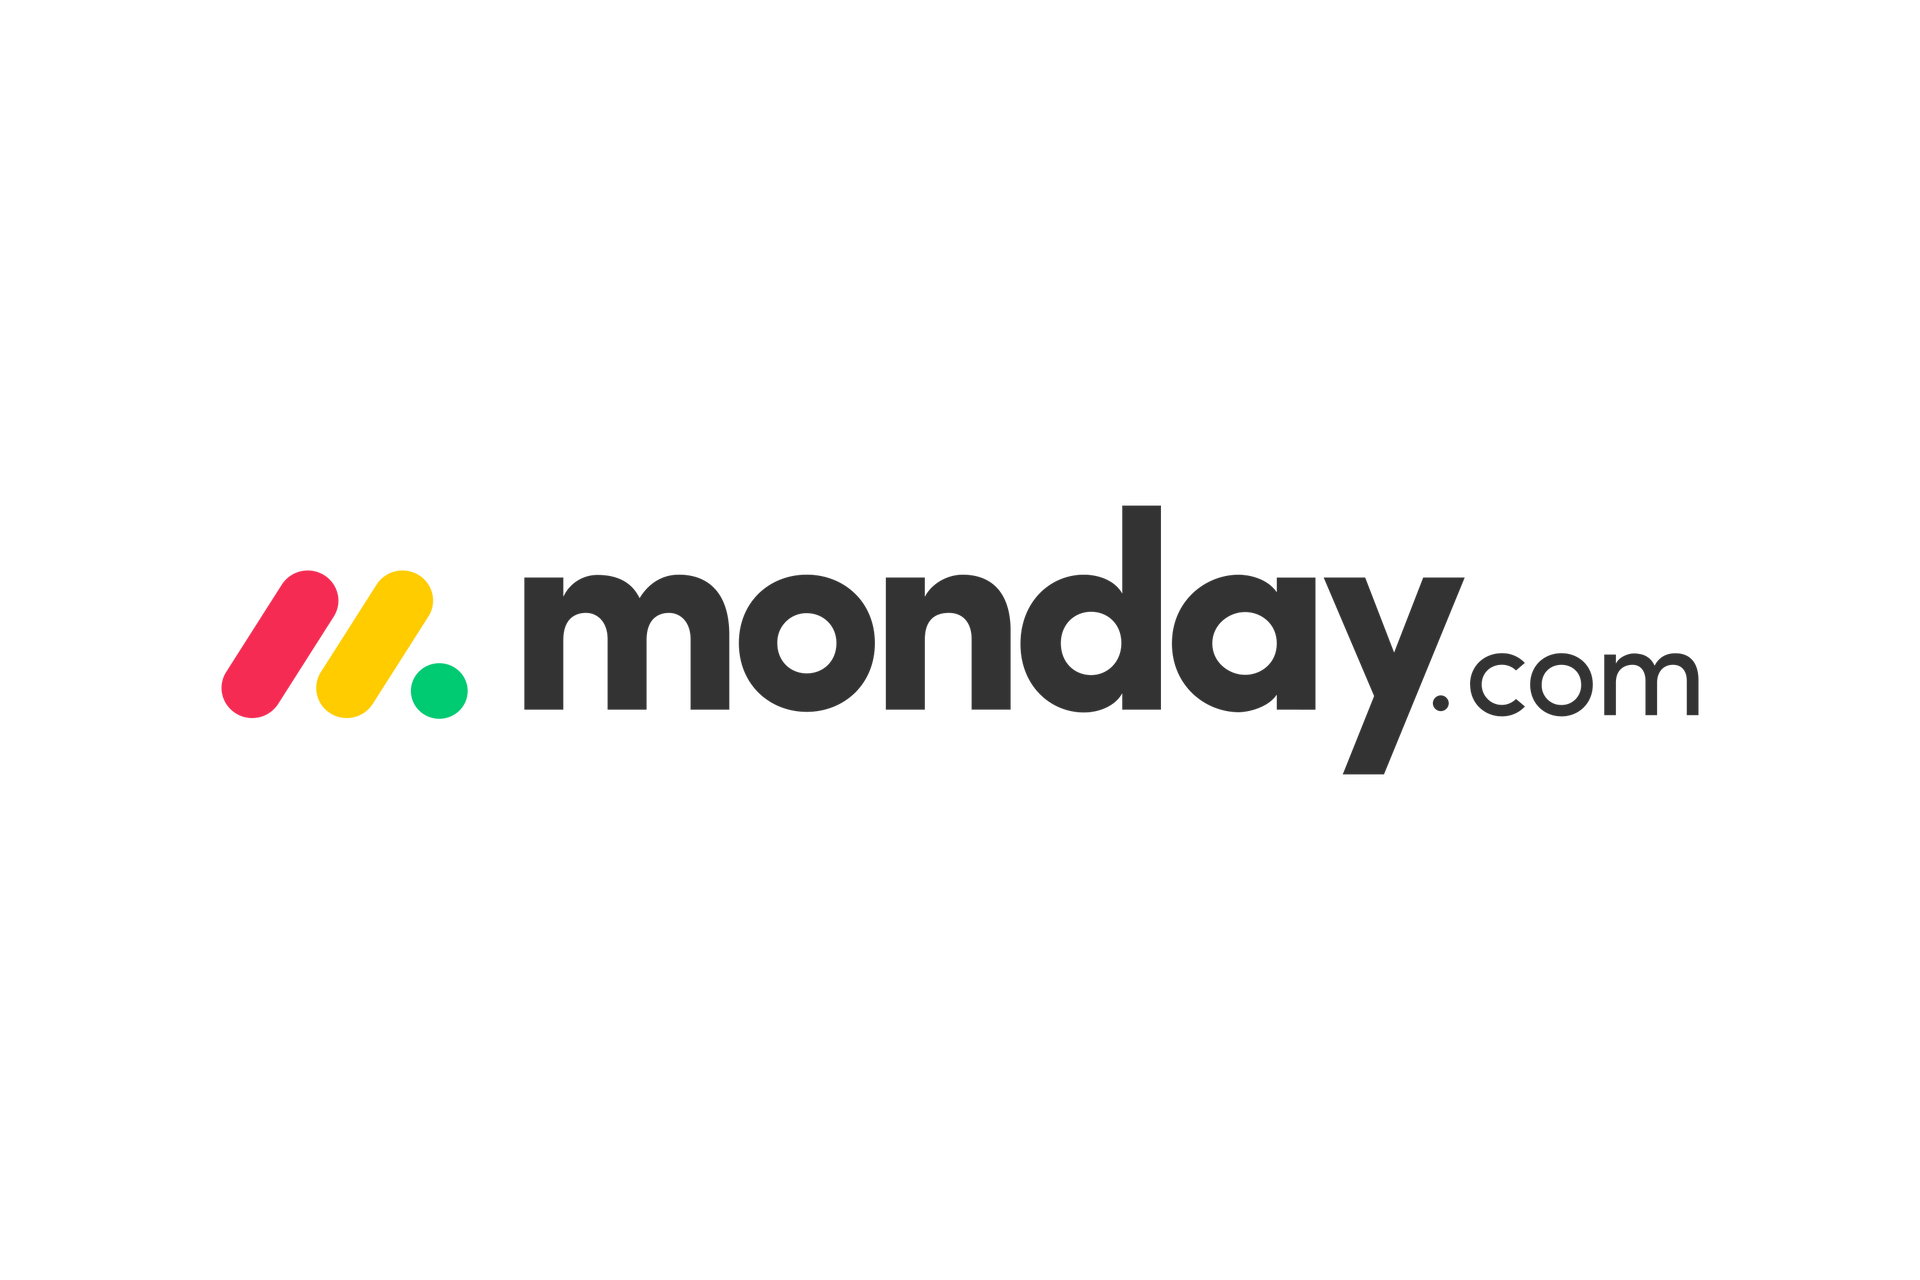 The logo for monday.com is a colorful logo on a white background.